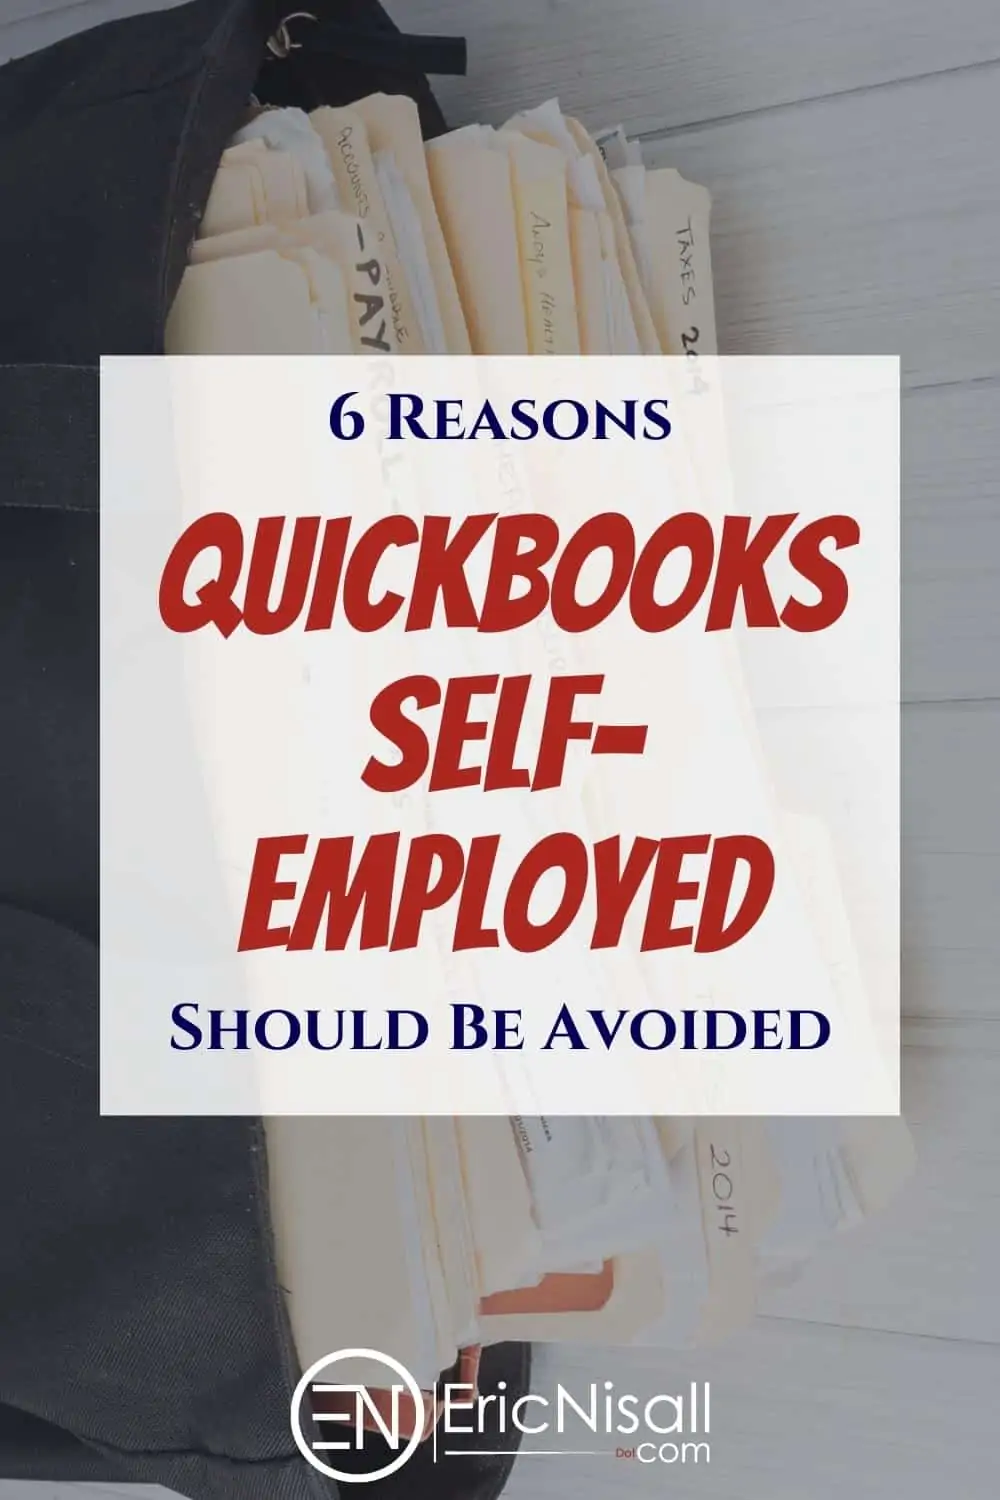 Many people will push you toward QuickBooks Self-Employed for a cheap small business accounting option. Let me save you from making a huge mistake. via @ericnisall